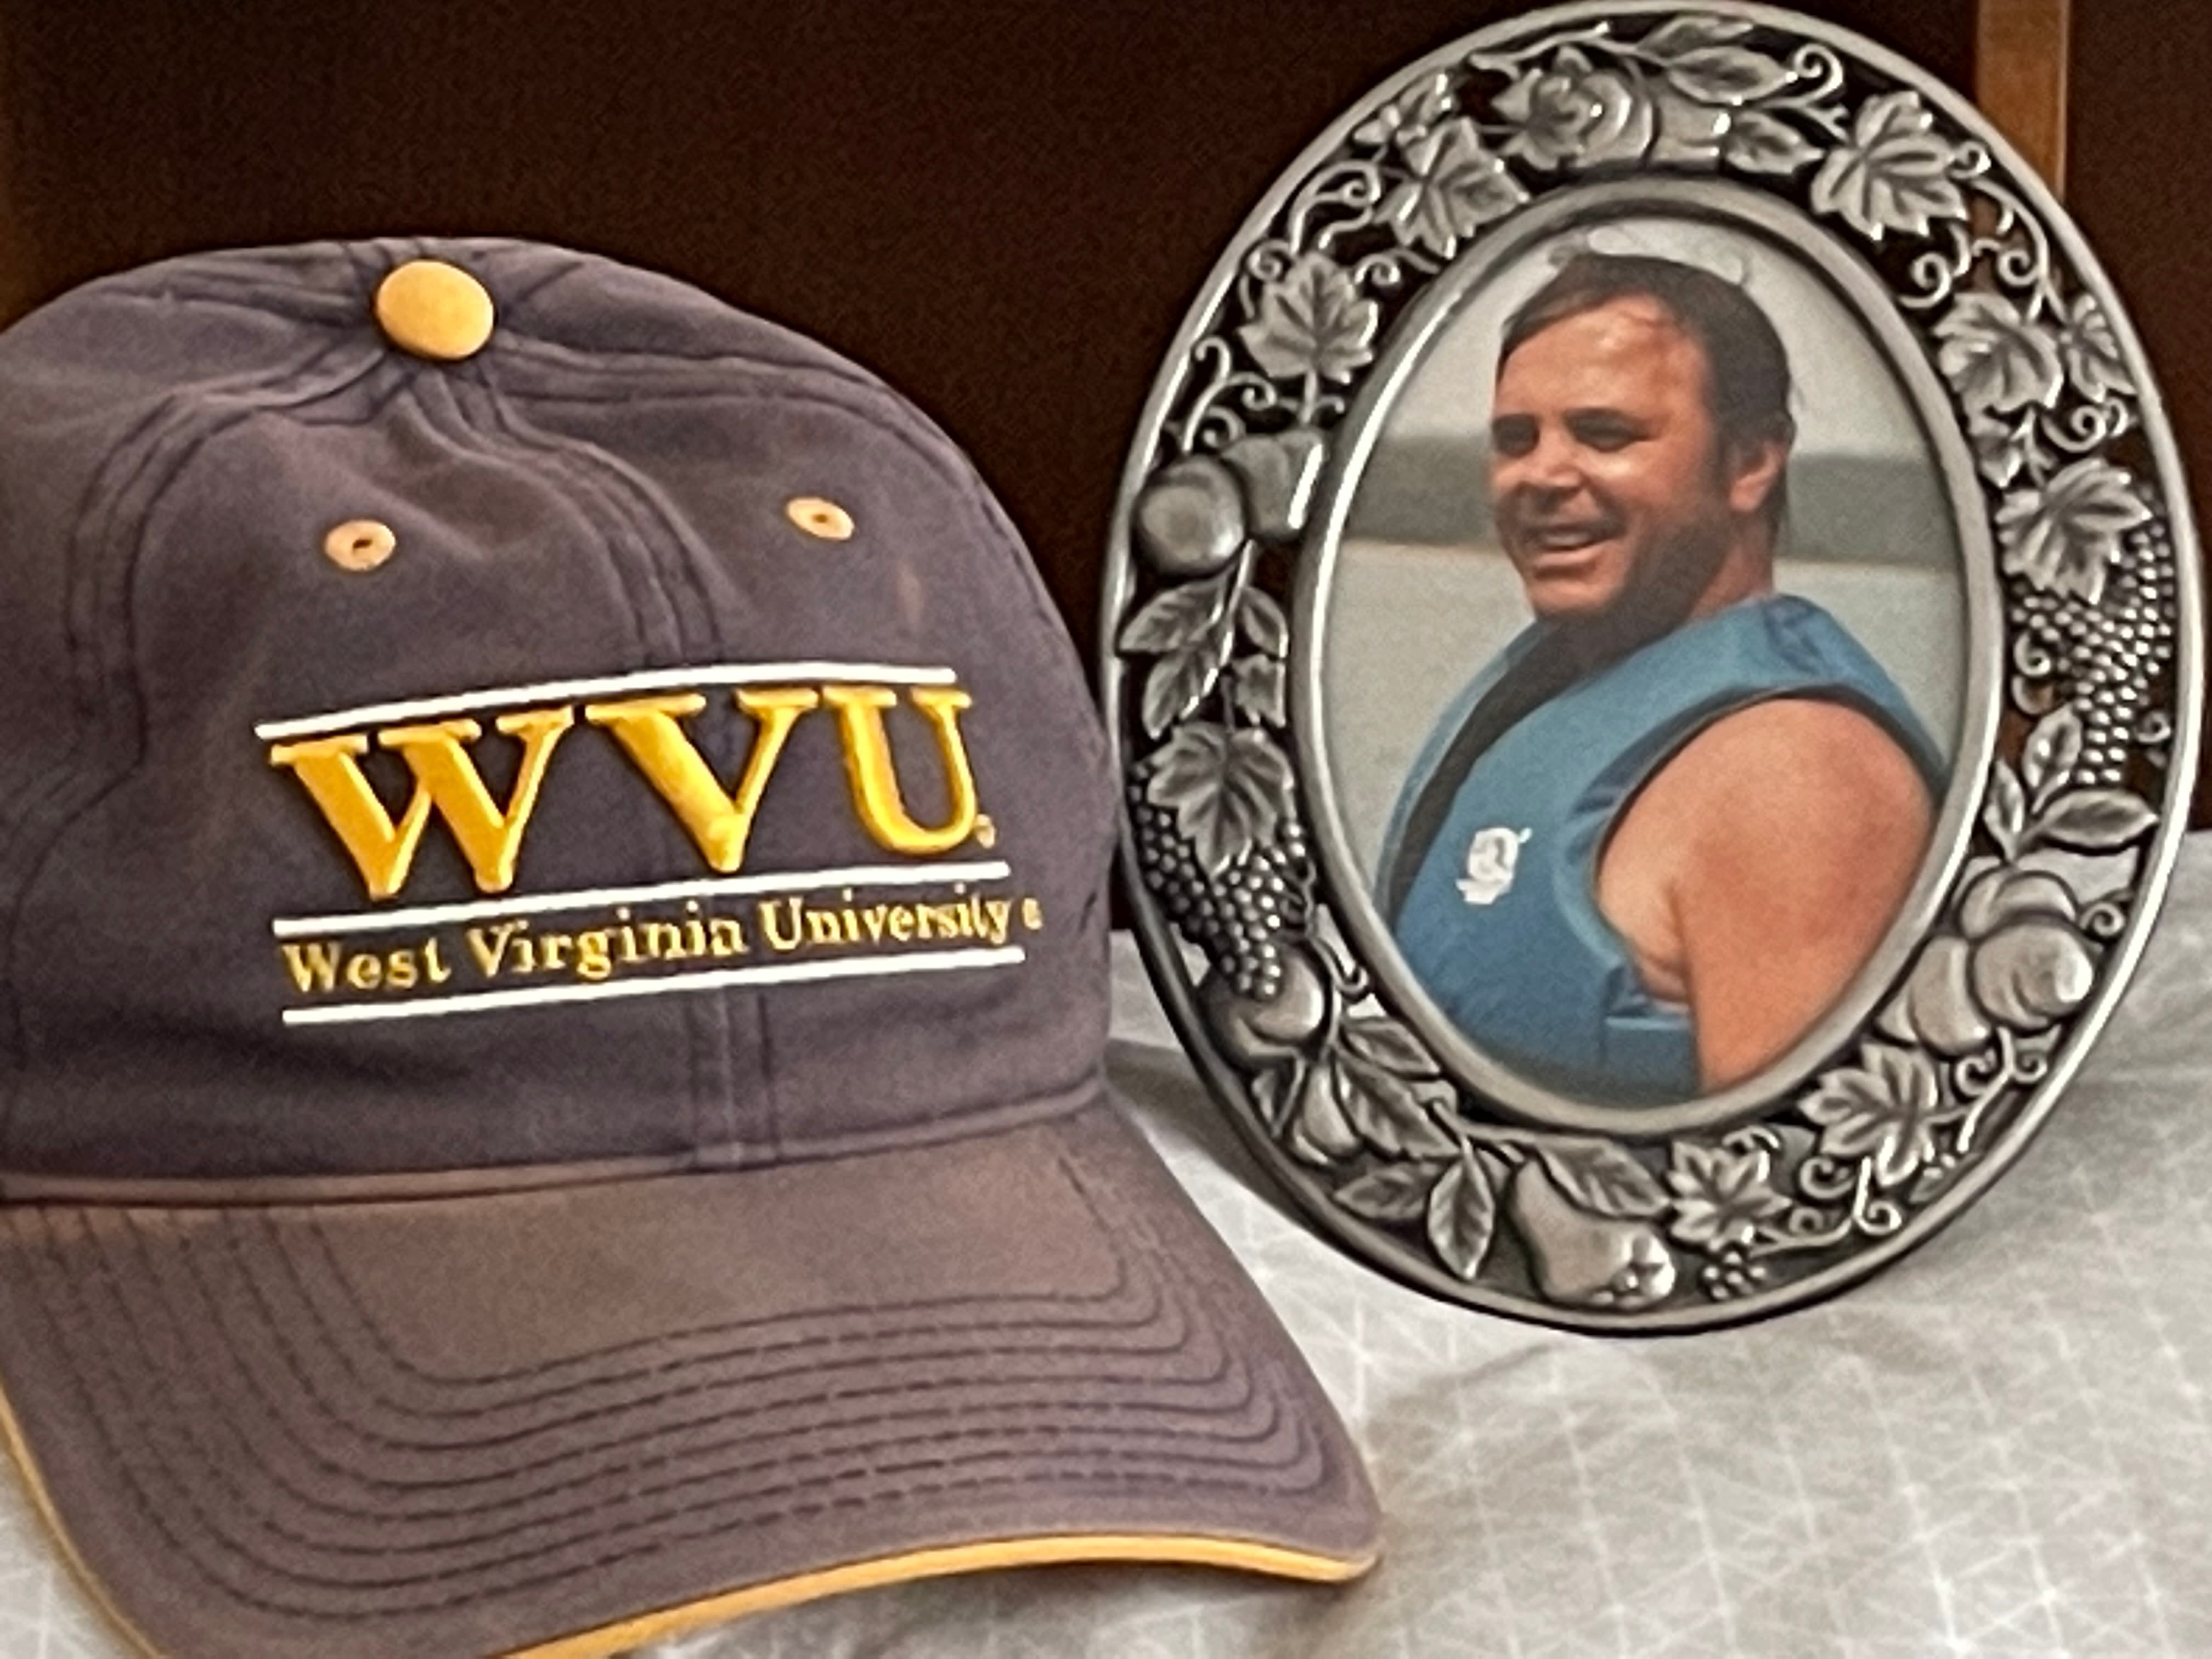 A picture of the famous WVU ballcap